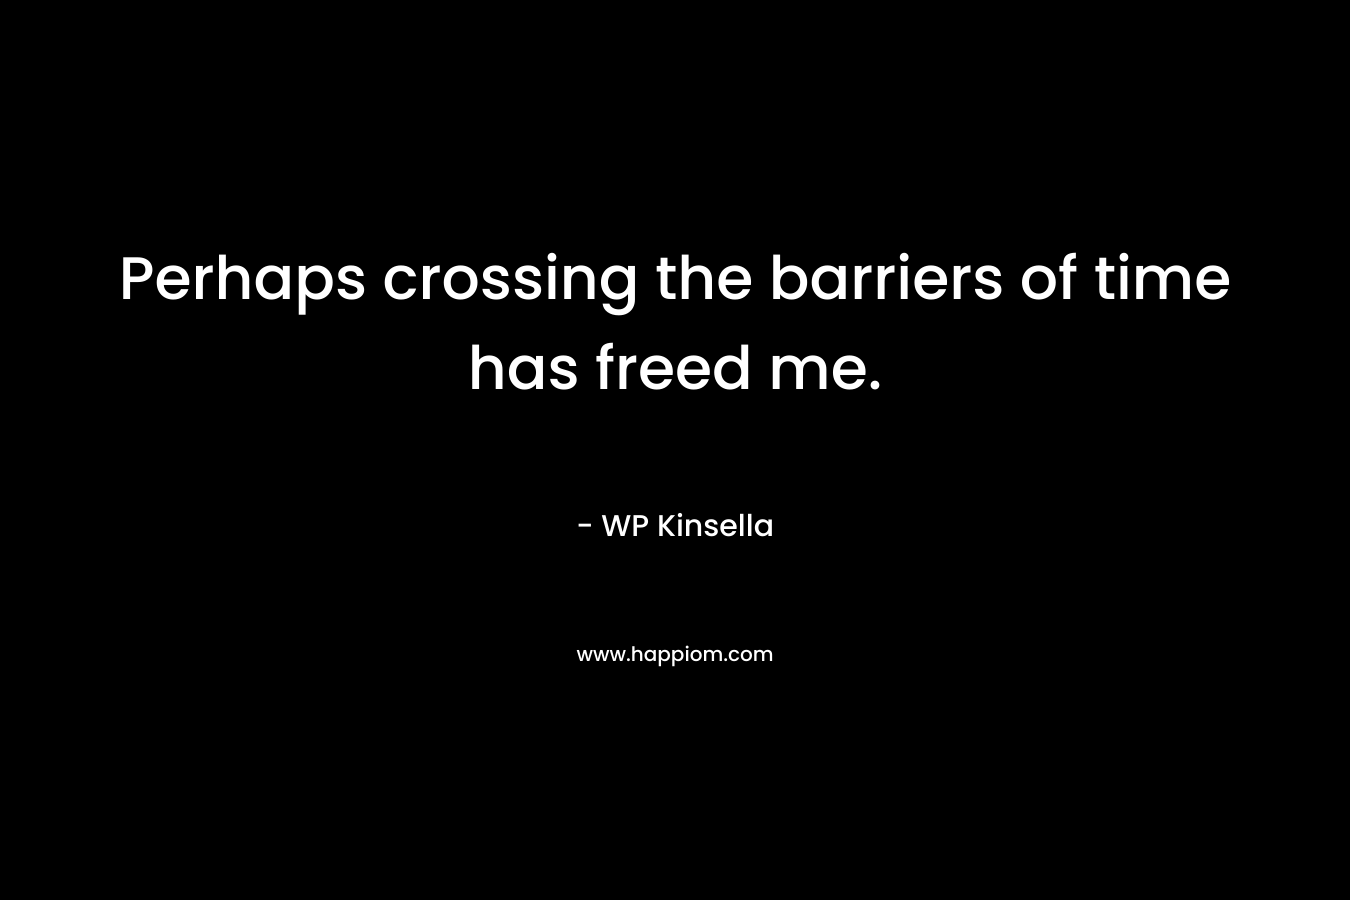 Perhaps crossing the barriers of time has freed me. – WP Kinsella